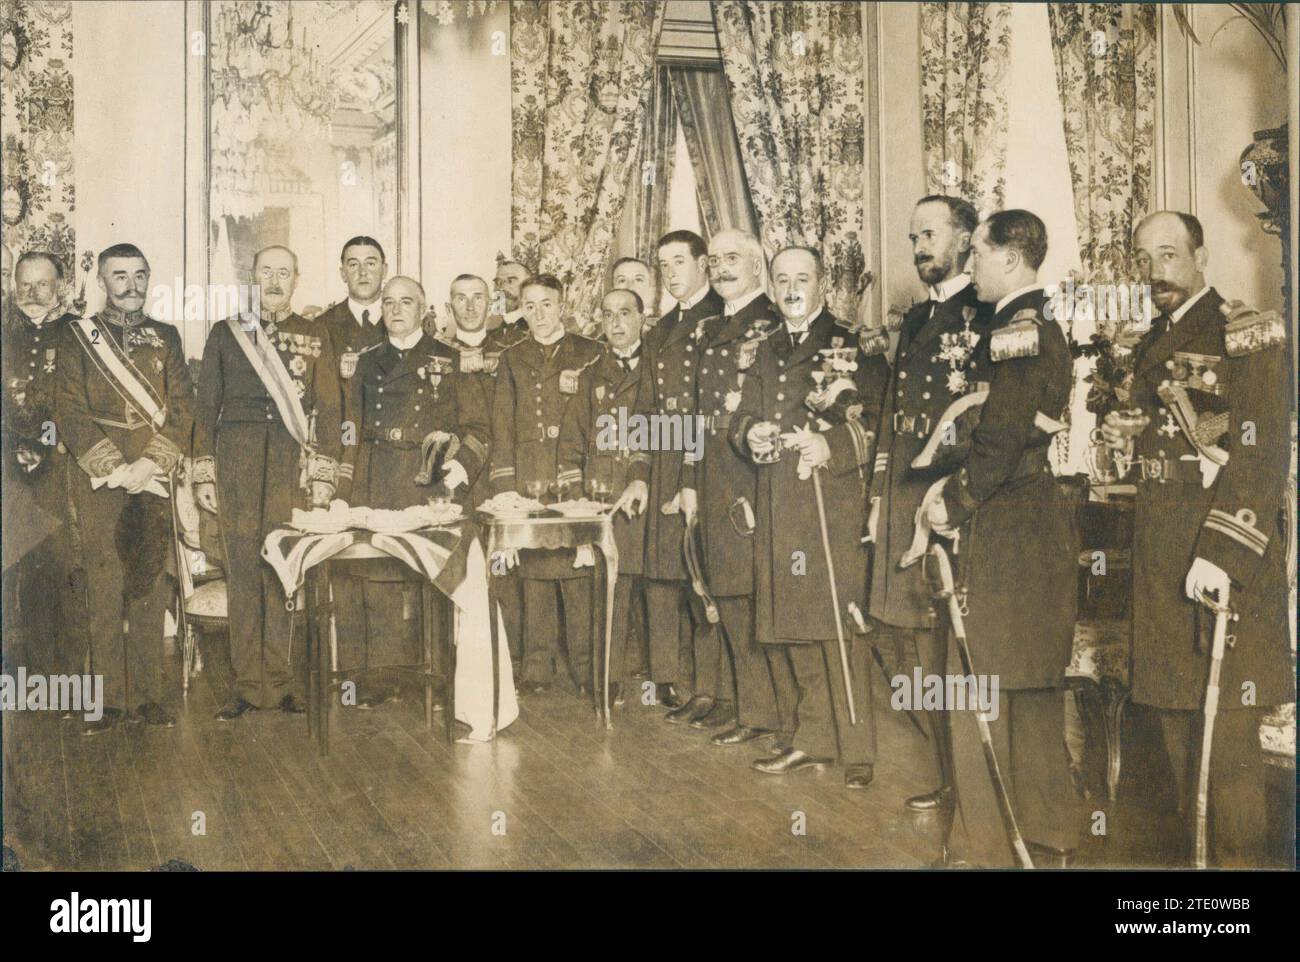 05/31/1919. Madrid. At the English embassy. The Ambassador, Mr. Ardinge (1), with the Officers of the Spanish Navy To Whom He Awarded English Decorations, Granted by King George in reward for their Services on the British Hospital Ships during the War. On behalf of HM The King D. Alfonso Xiii, his Secretary, D. Emilio Torres (2) attended this event. Credit: Album / Archivo ABC / Julio Duque Stock Photo